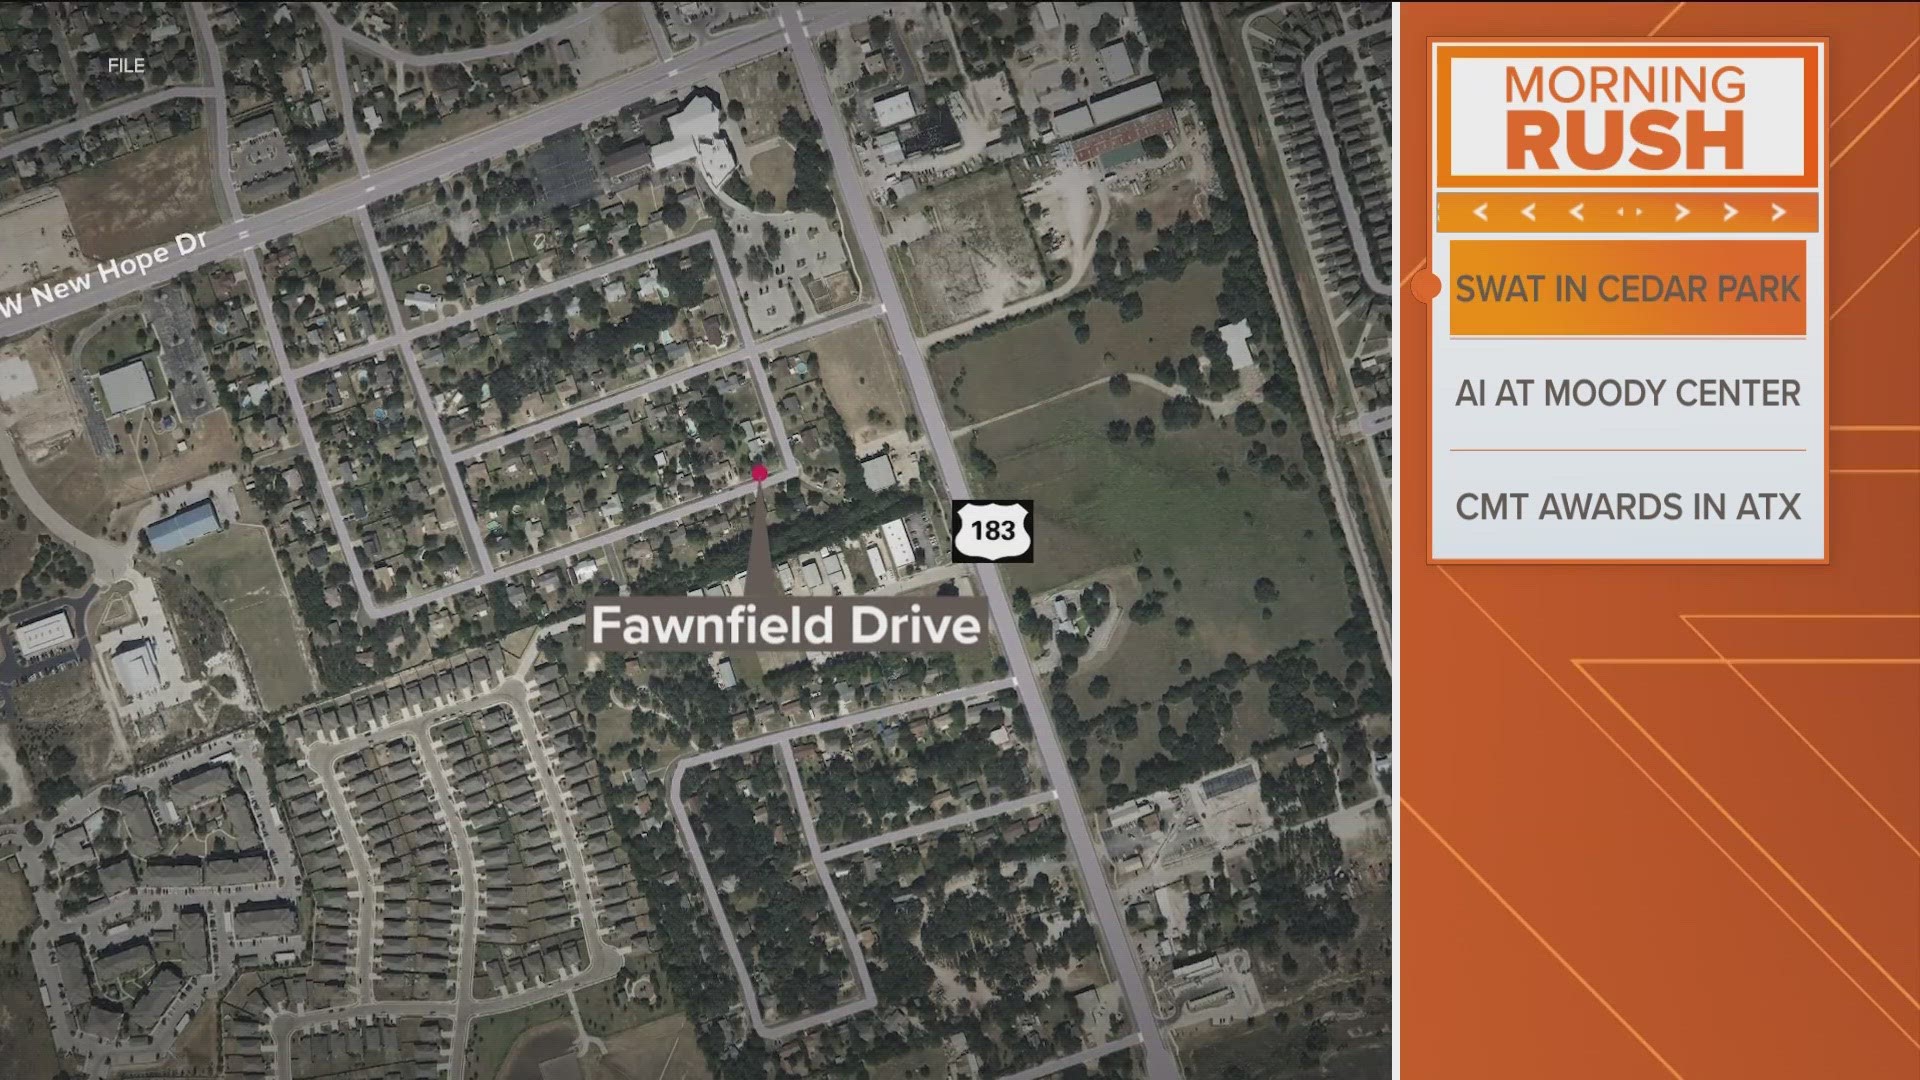 The shooting happened Saturday on Fawnfield Drive.